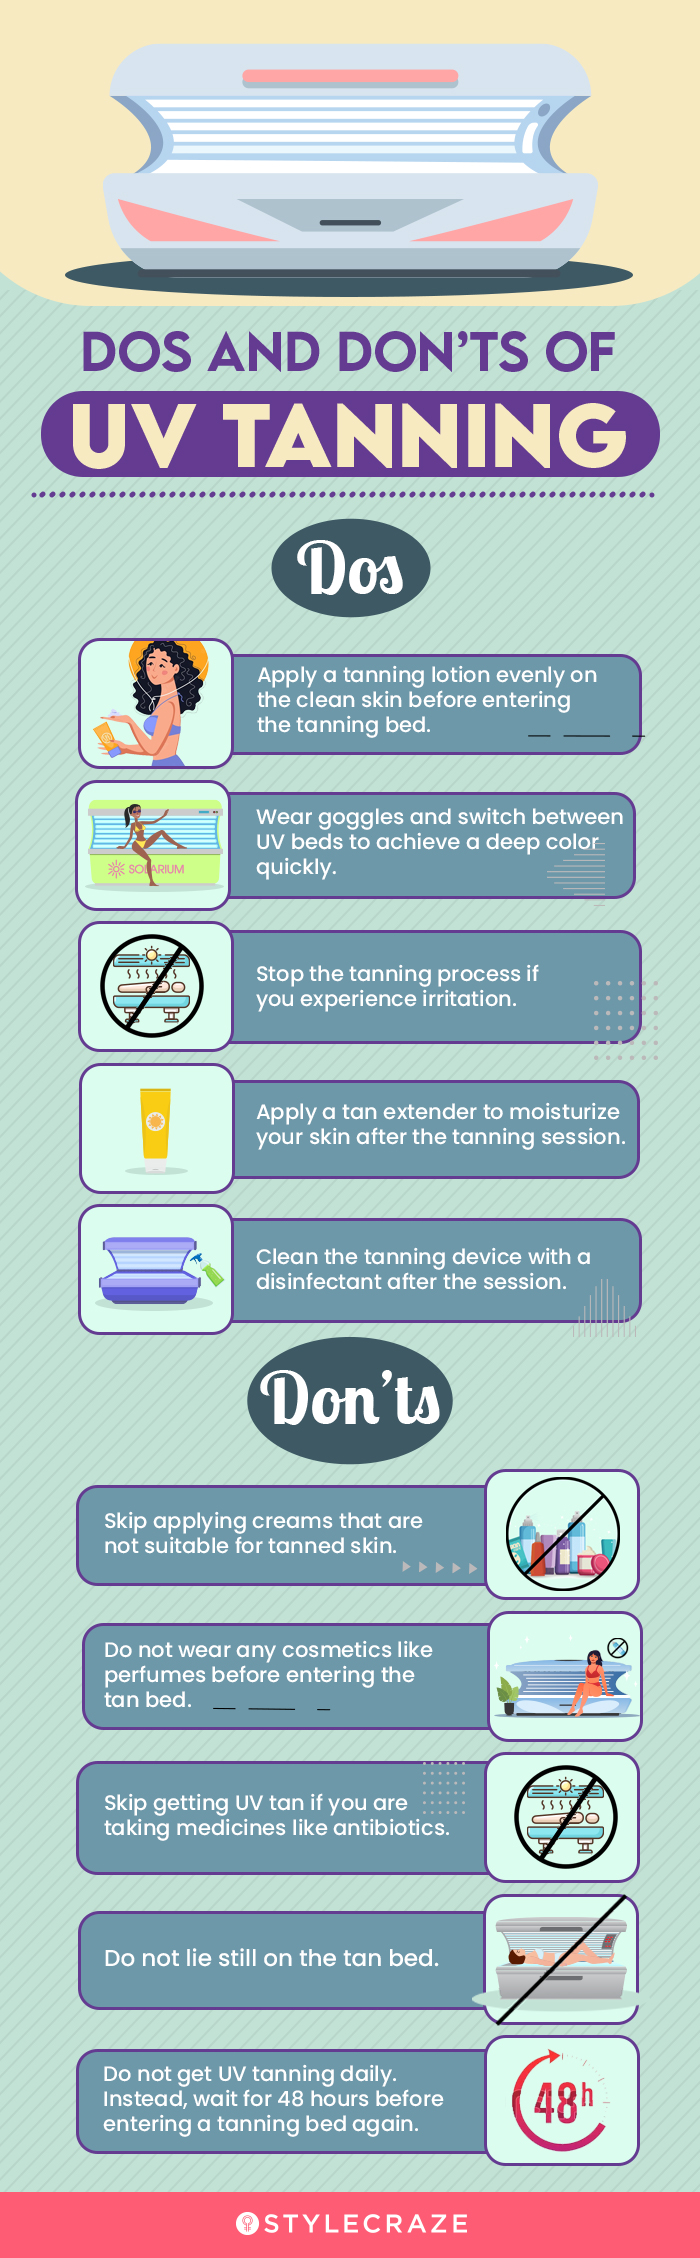 Do’s And Don’ts Of UV Tanning(infographic)